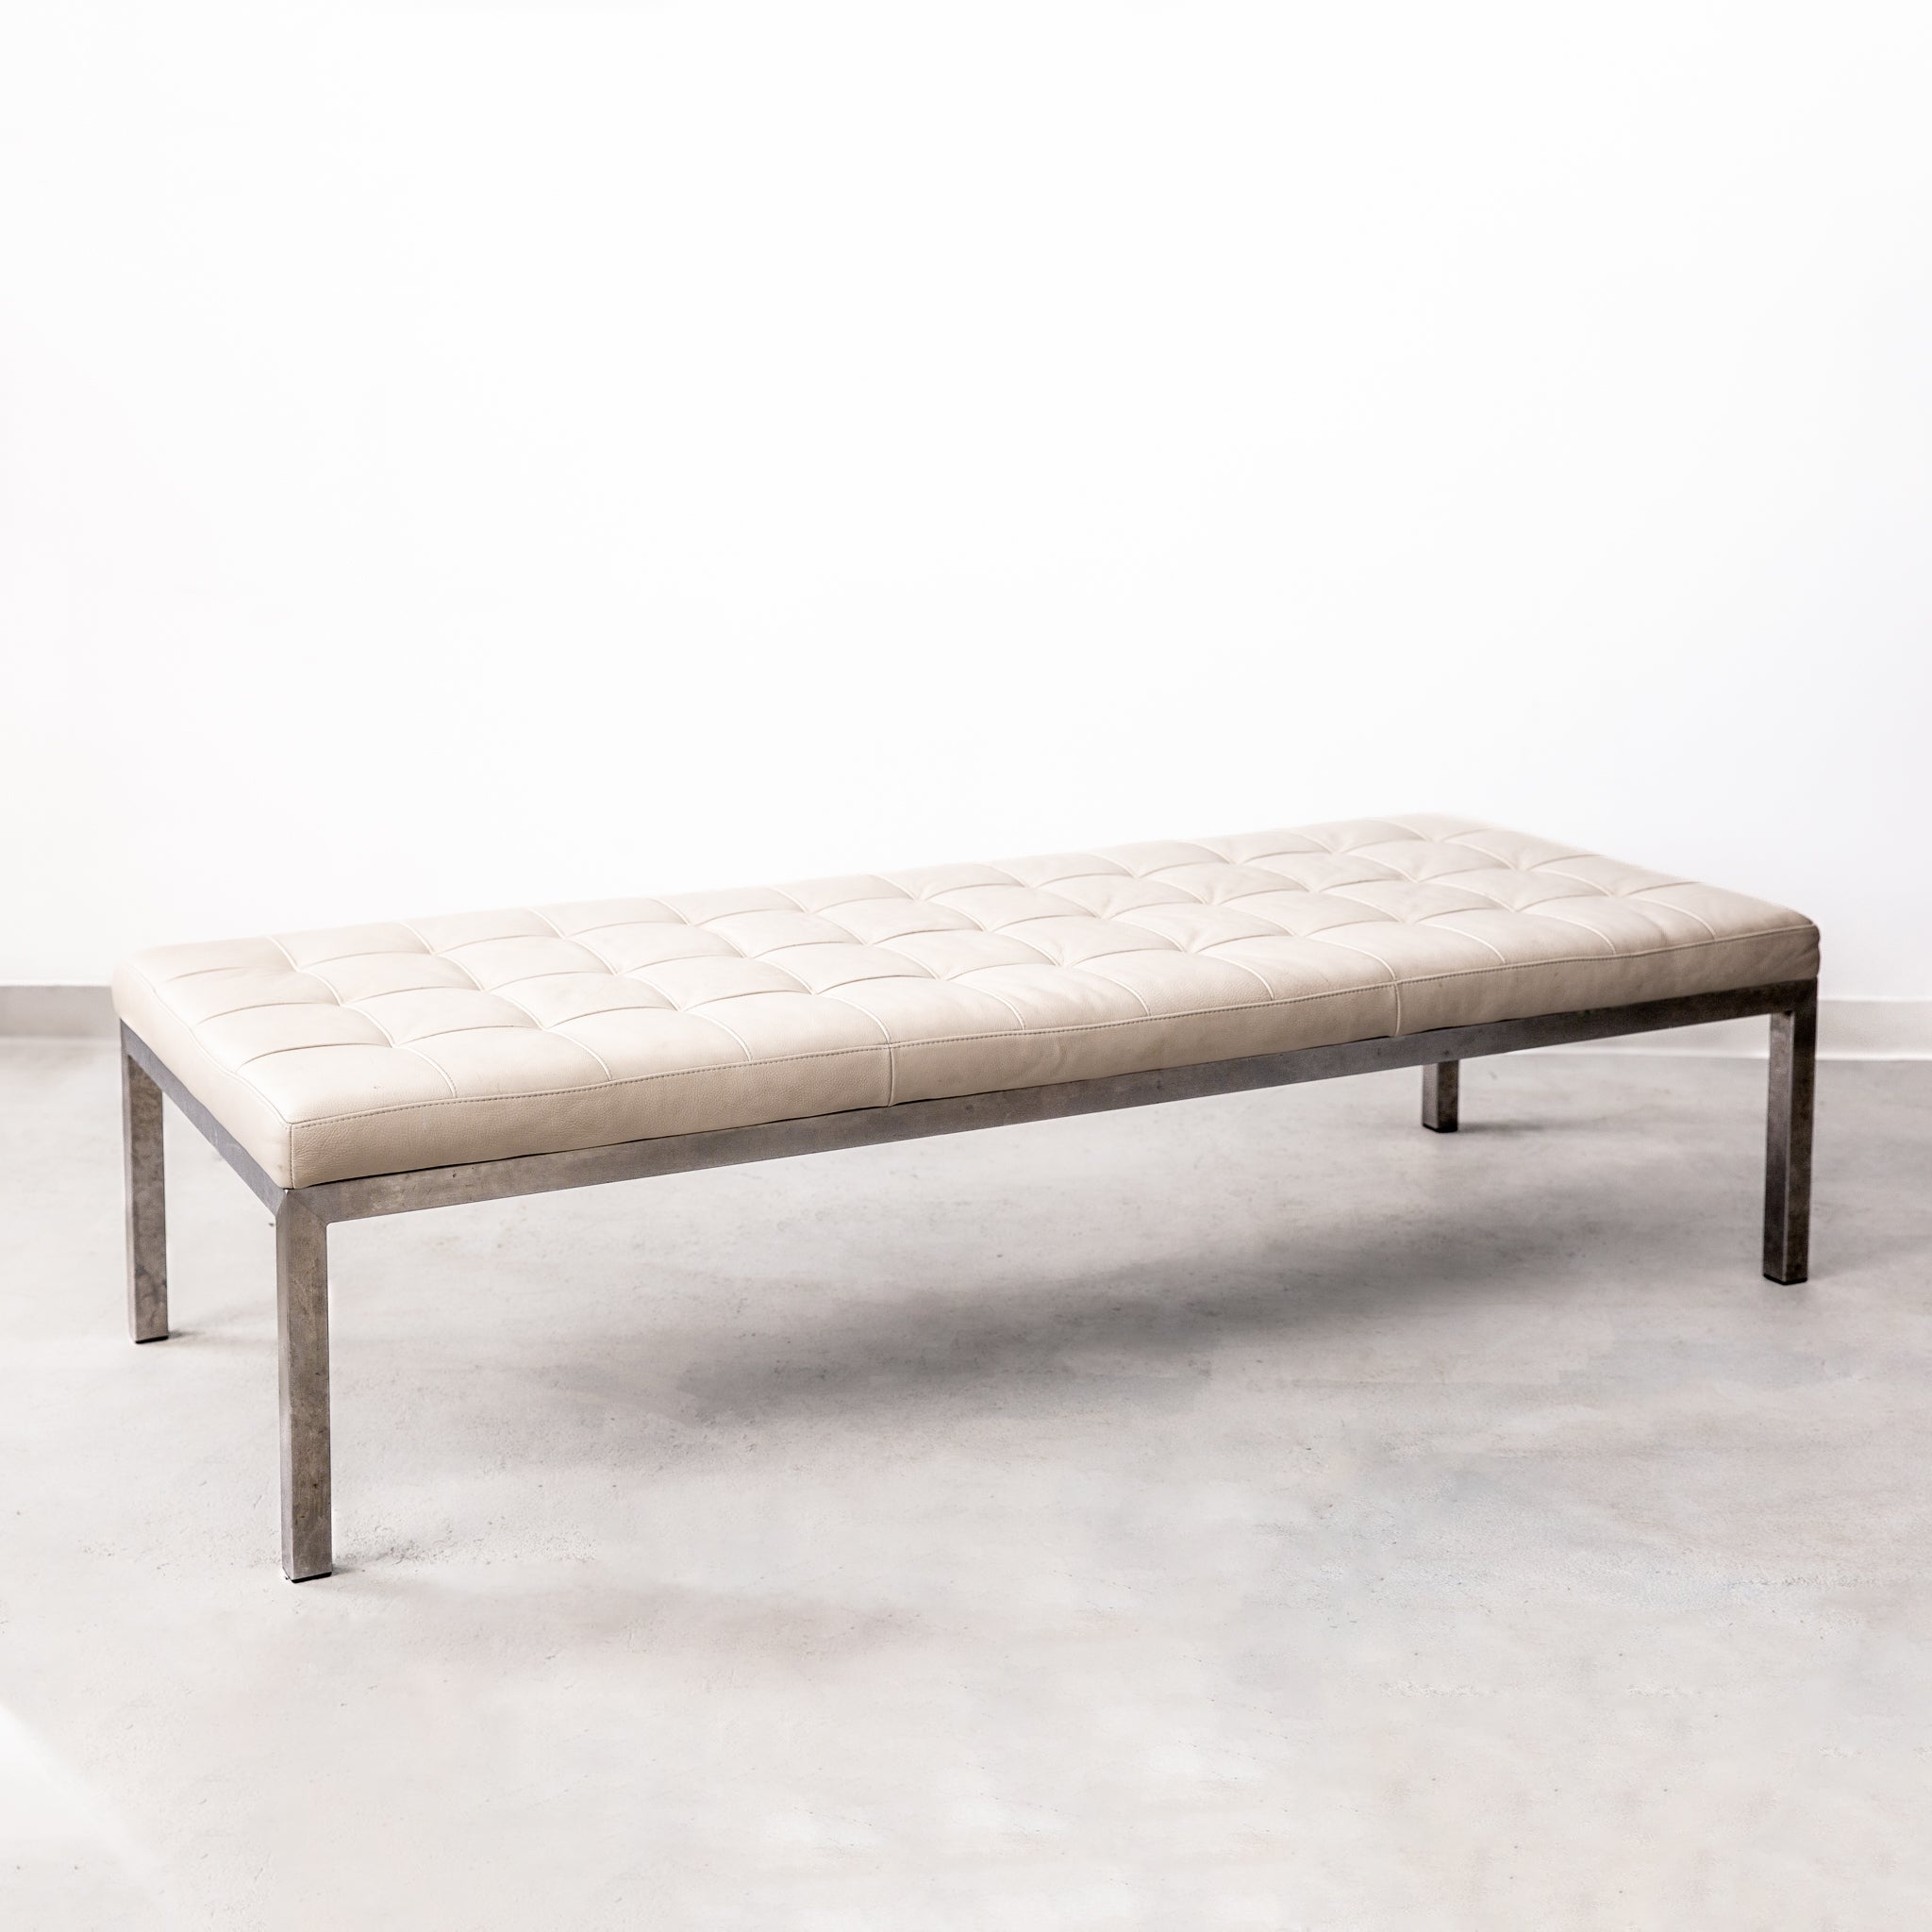 Room & Board Ravella Leather Daybed